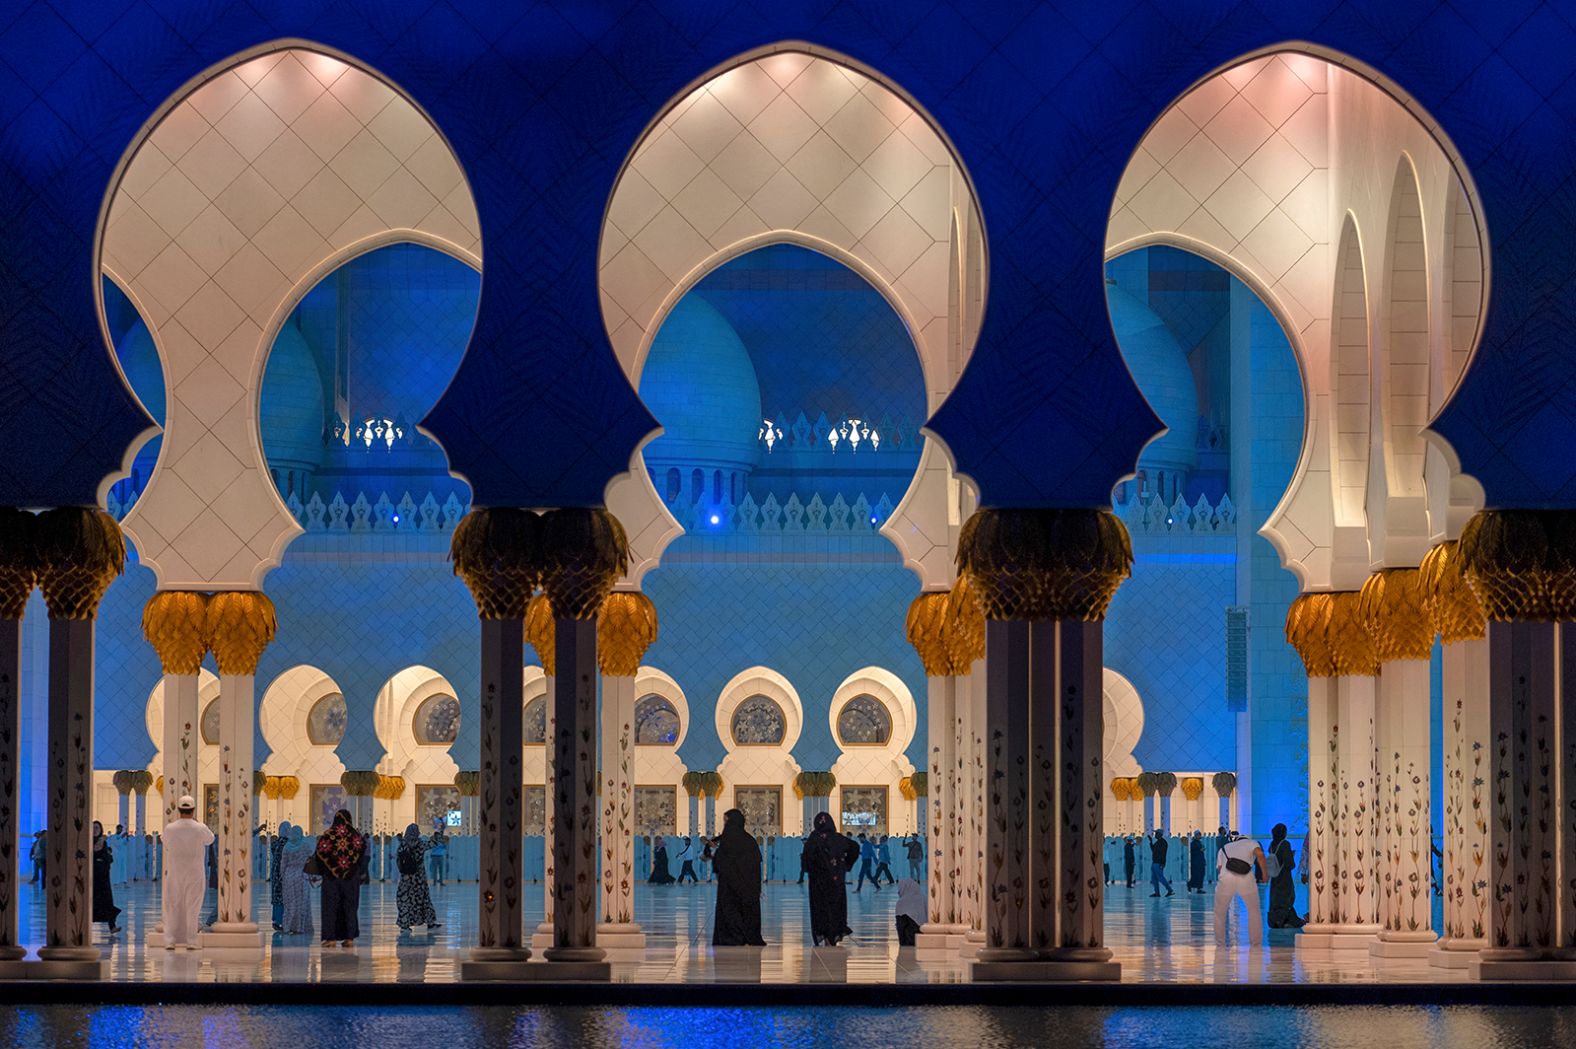 Devotees gather at the Sheikh Zayed Grand Mosque on the first day of Ramadan in Abu Dhabi, United Arab Emirates.